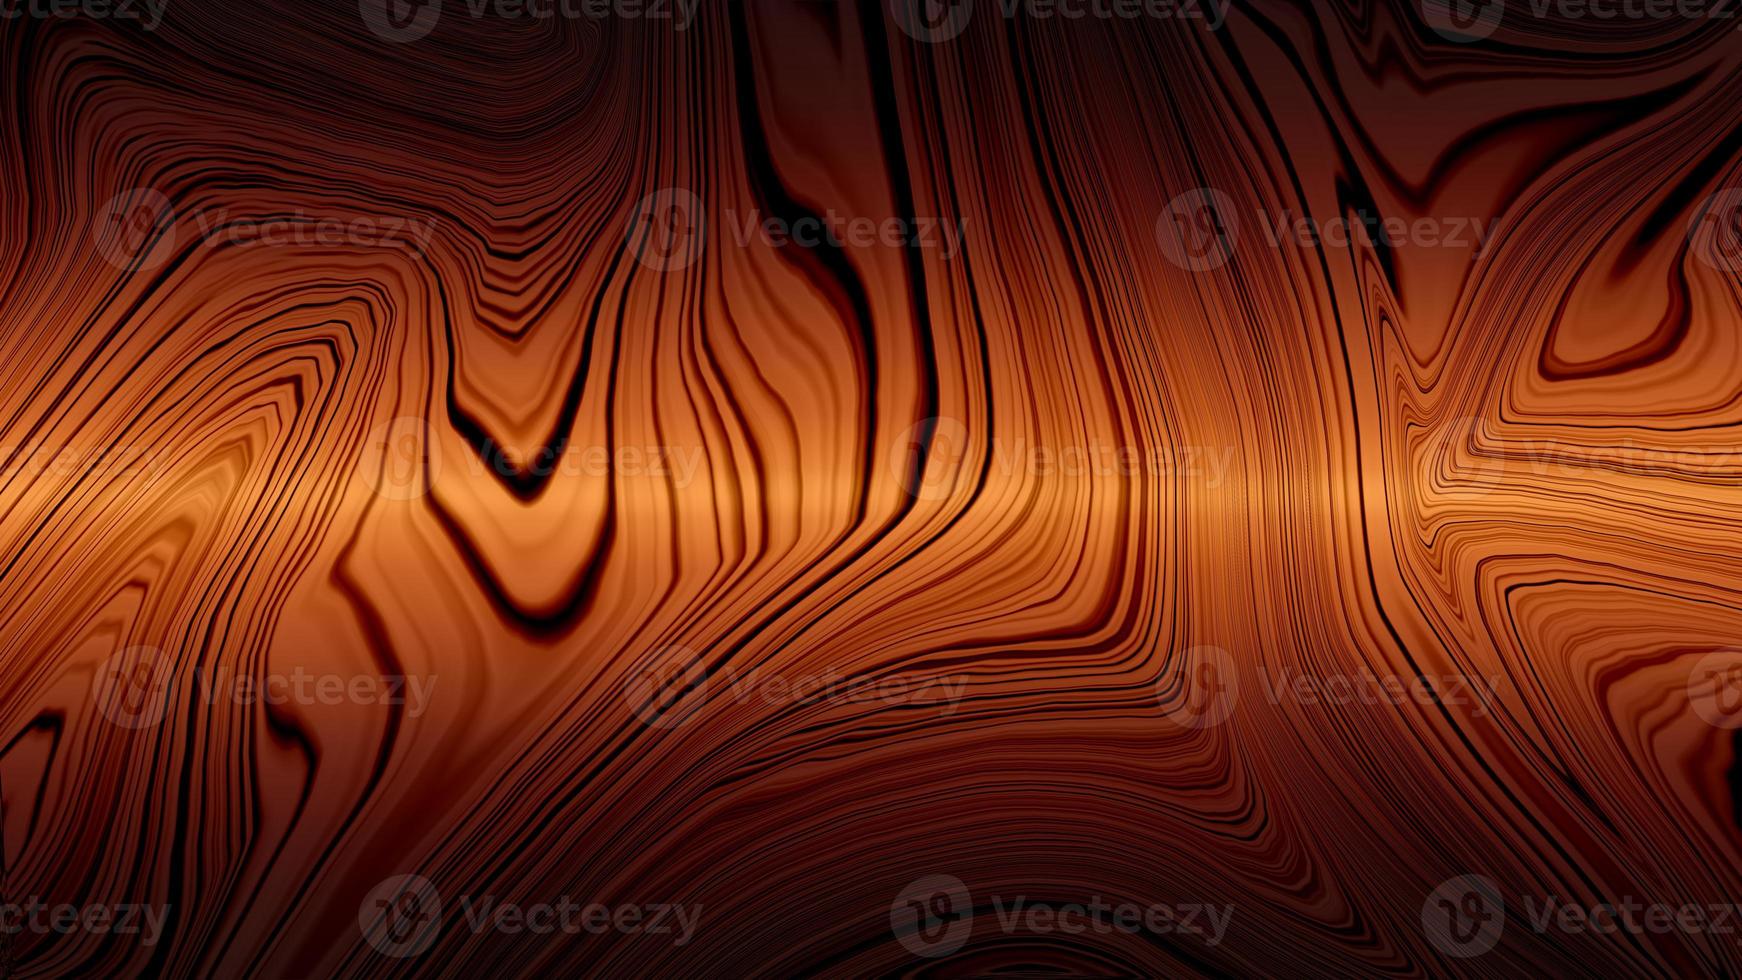 Liquify abstract pattern with gold and chocolate background. Digital background with liquifying flow. Liquify effect golden background. Beautiful marble texture. Colorful background with wavy liquify photo